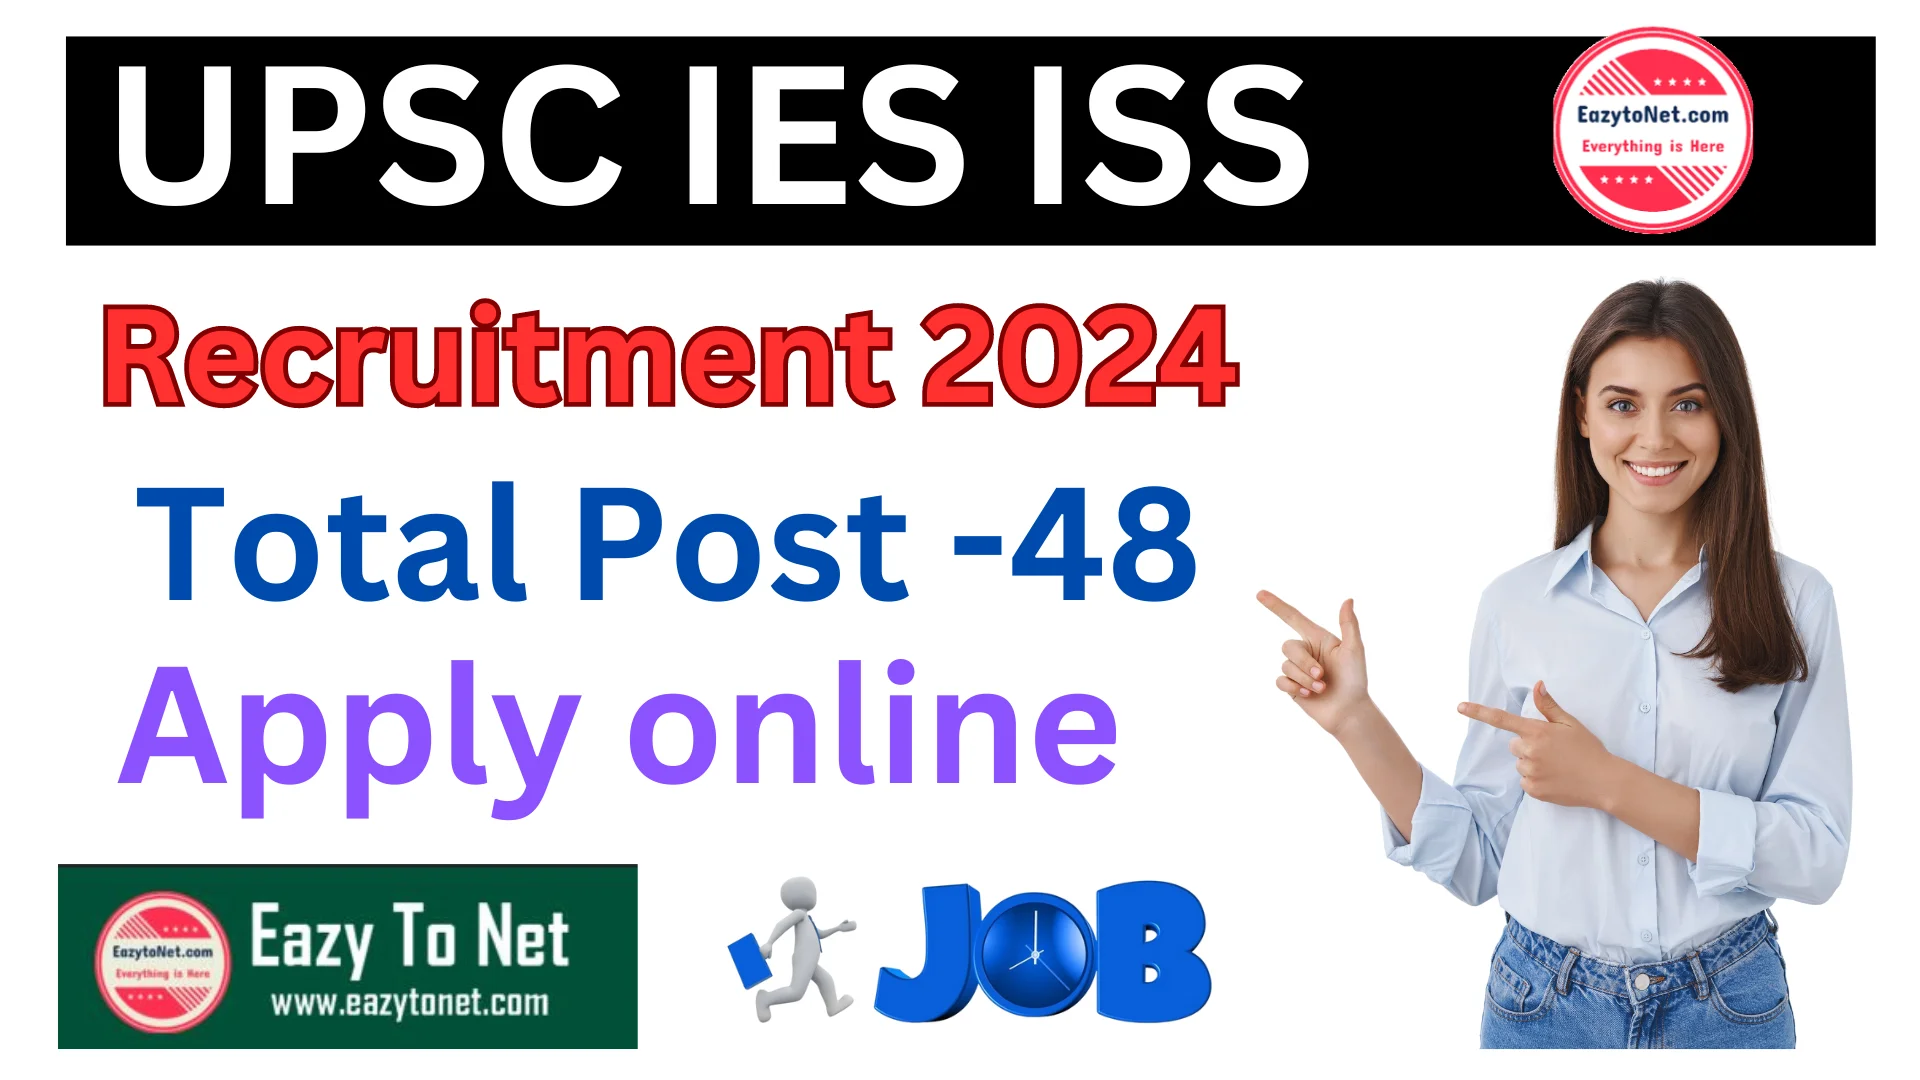 UPSC IES ISS Recruitment 2024 : UPSC IES ISS Vacancy 2024 Apply Online, Notification Out For 48 Post